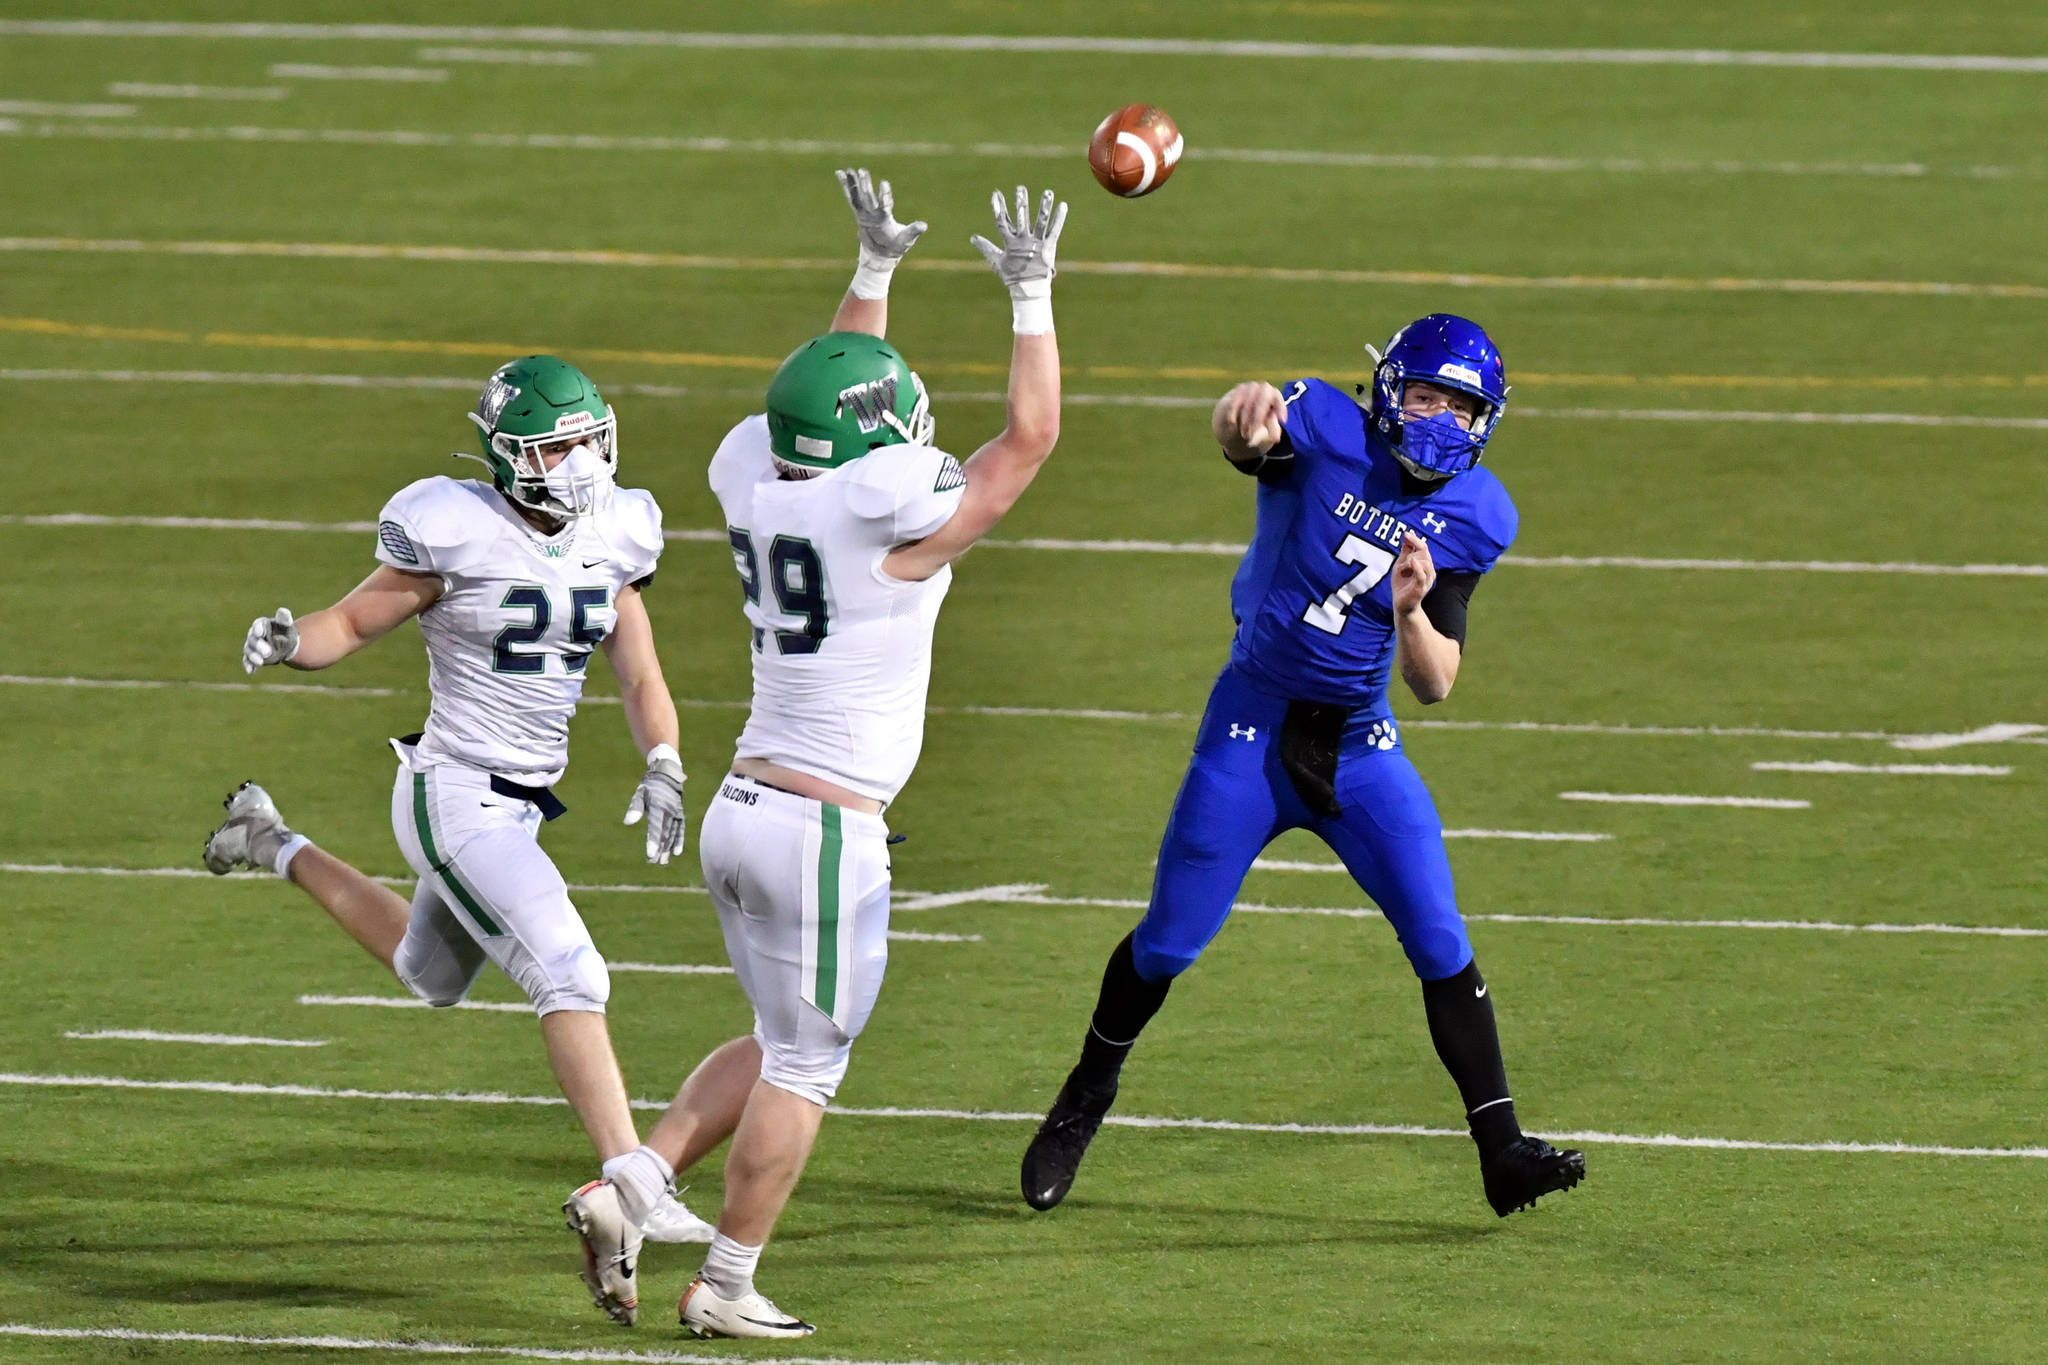 Bothell’s Andrew Sirmon unleashes a pass against Woodinville. Photo courtesy of Greg Nelson